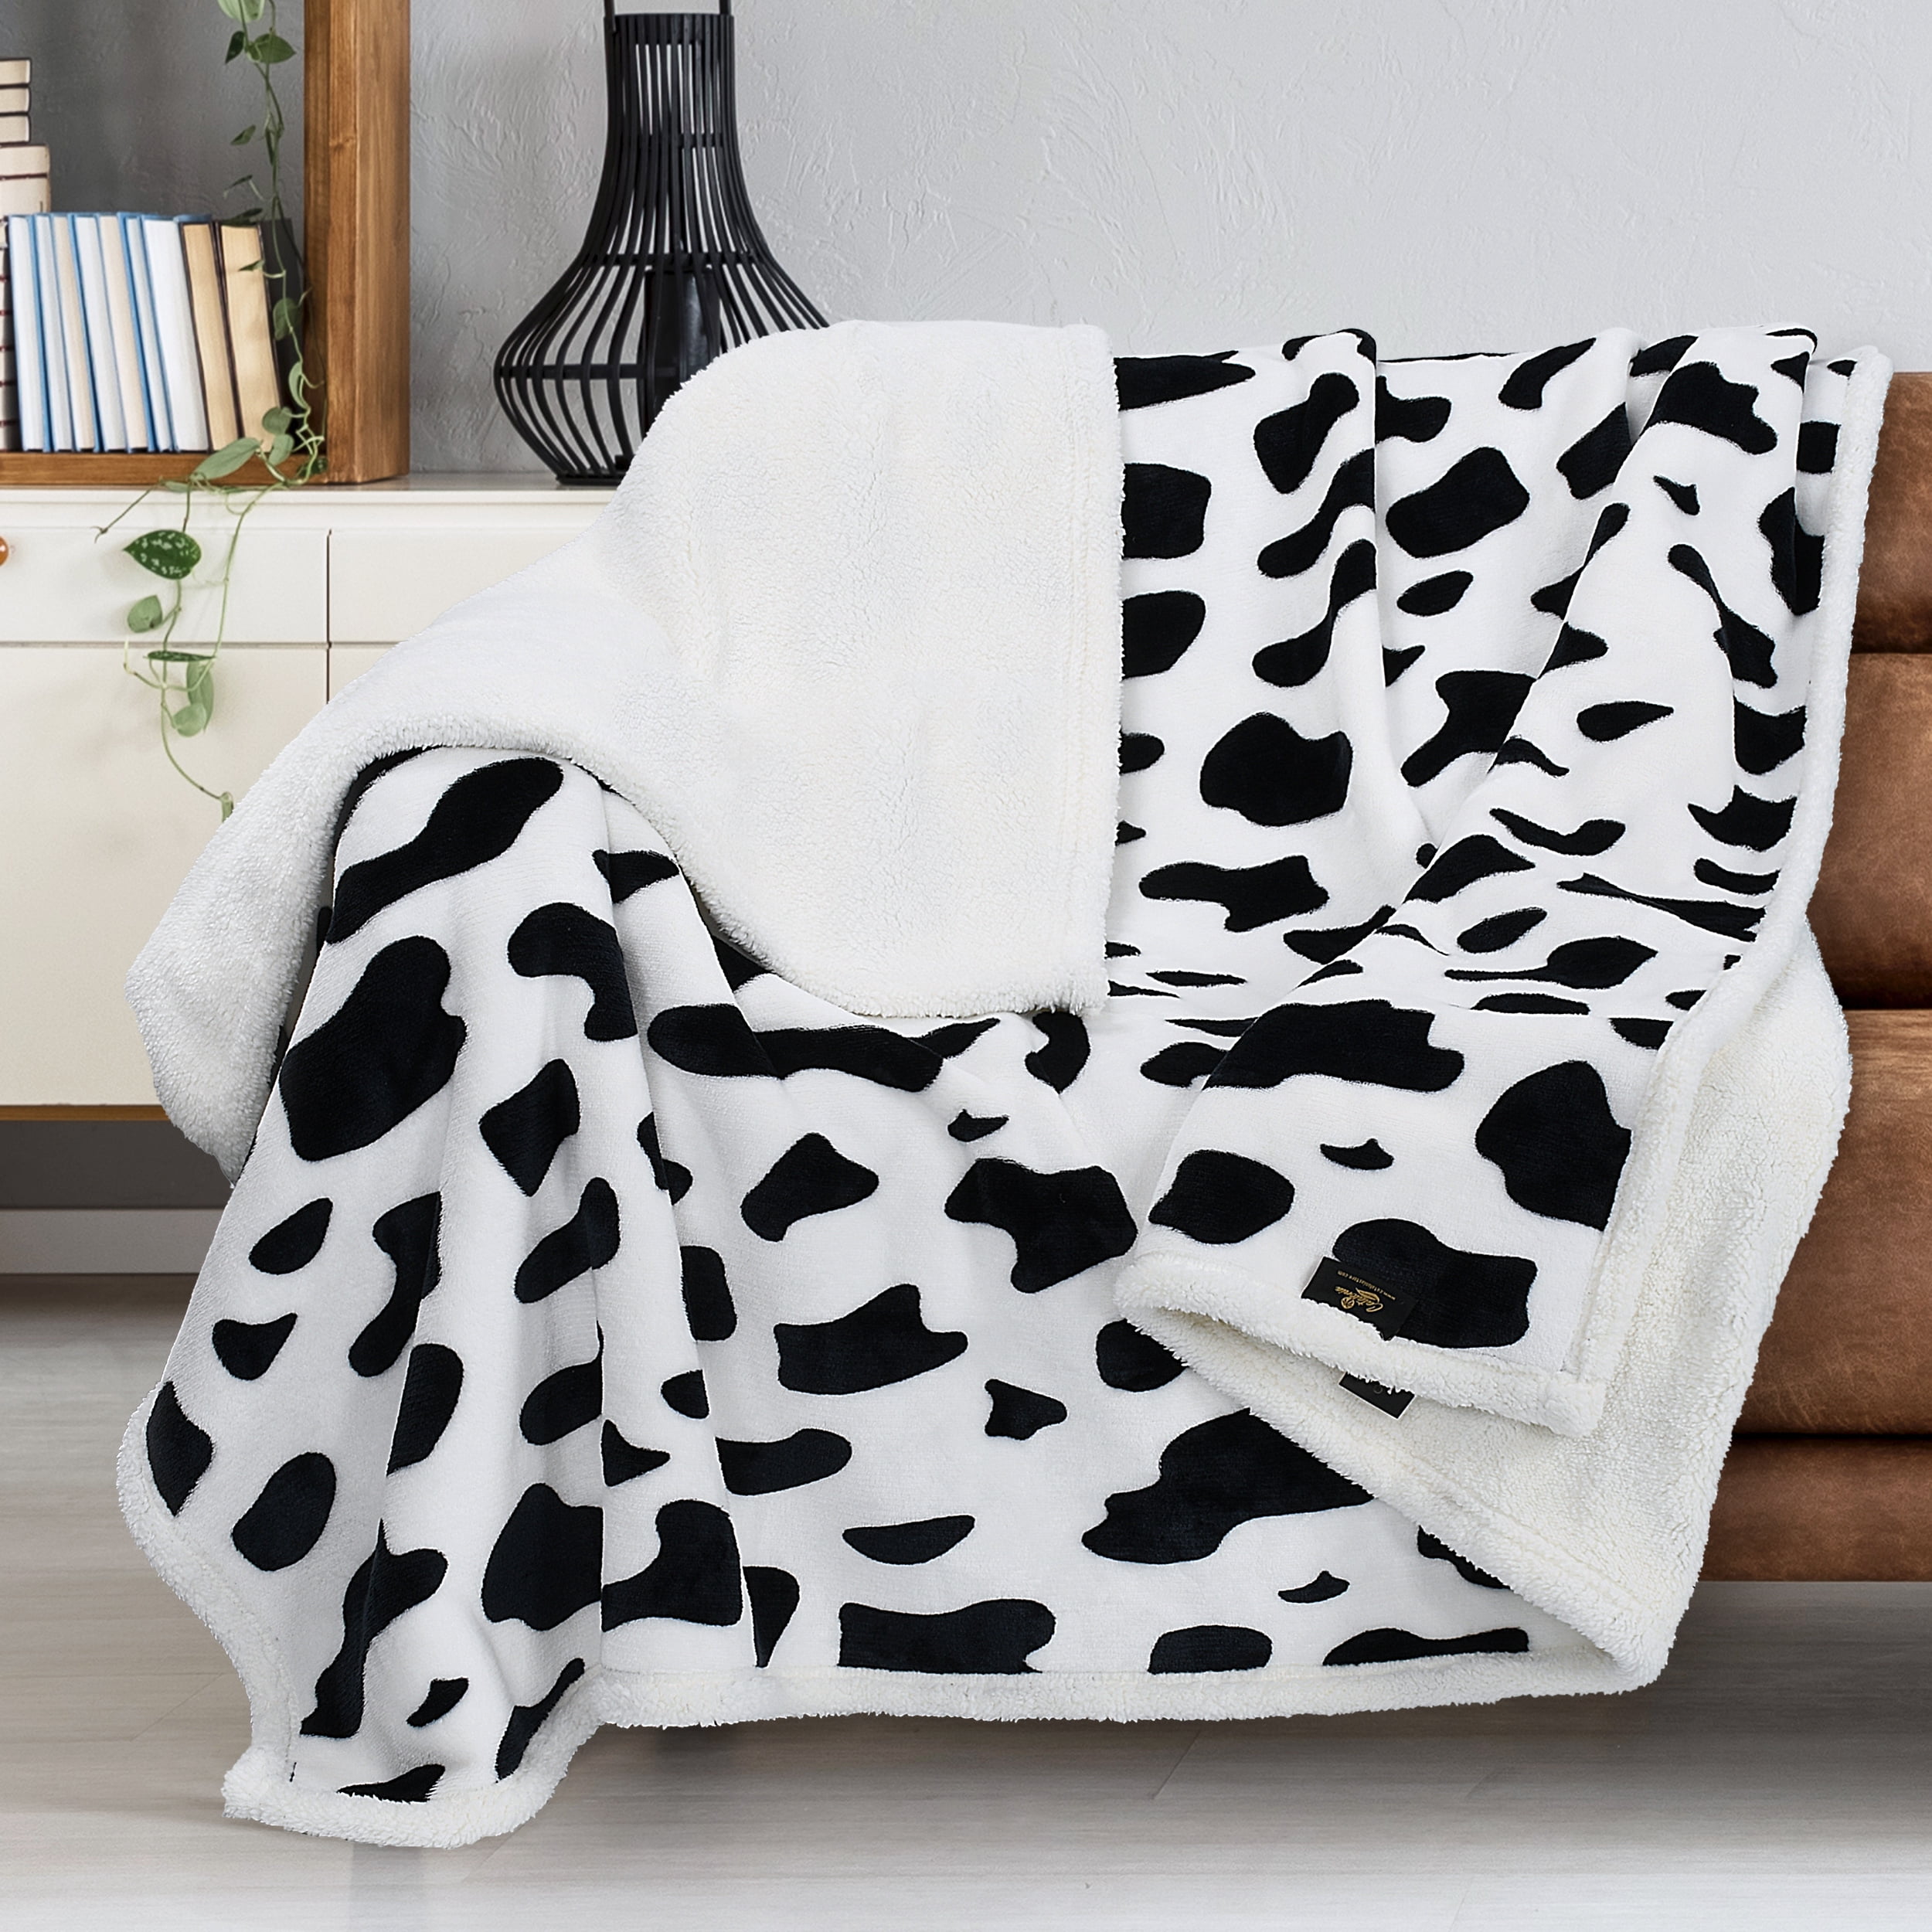 Fun Farm Animal Cow Showers Sherpa Flannel Throw Blankets Thick Reversible Plush Fleece Blanket for Bed Couch Sofa Decor Rustic Wood Planks Ultra Soft Comfy Warm Fuzzy TV Blanket 49x59in